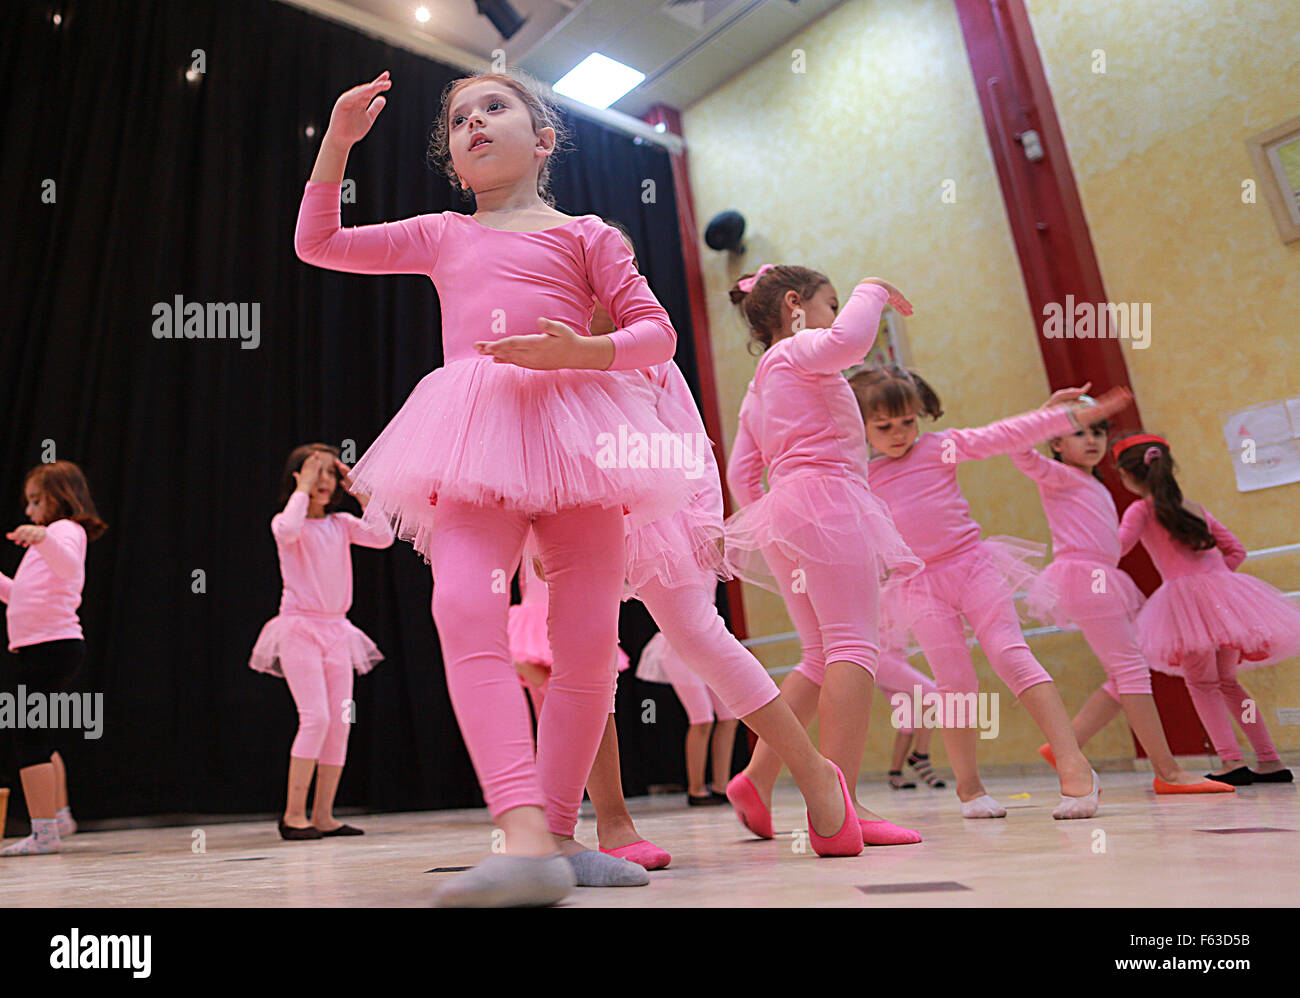 Gaza. 10th Nov, 2015. Palestinian girls attend a ballet class in Gaza City, on November 10, 2015. Most of the girls began learning ballet when they were only 3 or 4 years old. Hard training has made a great improvement in their dancing skills. © Yasser Qudih/Xinhua/Alamy Live News Stock Photo